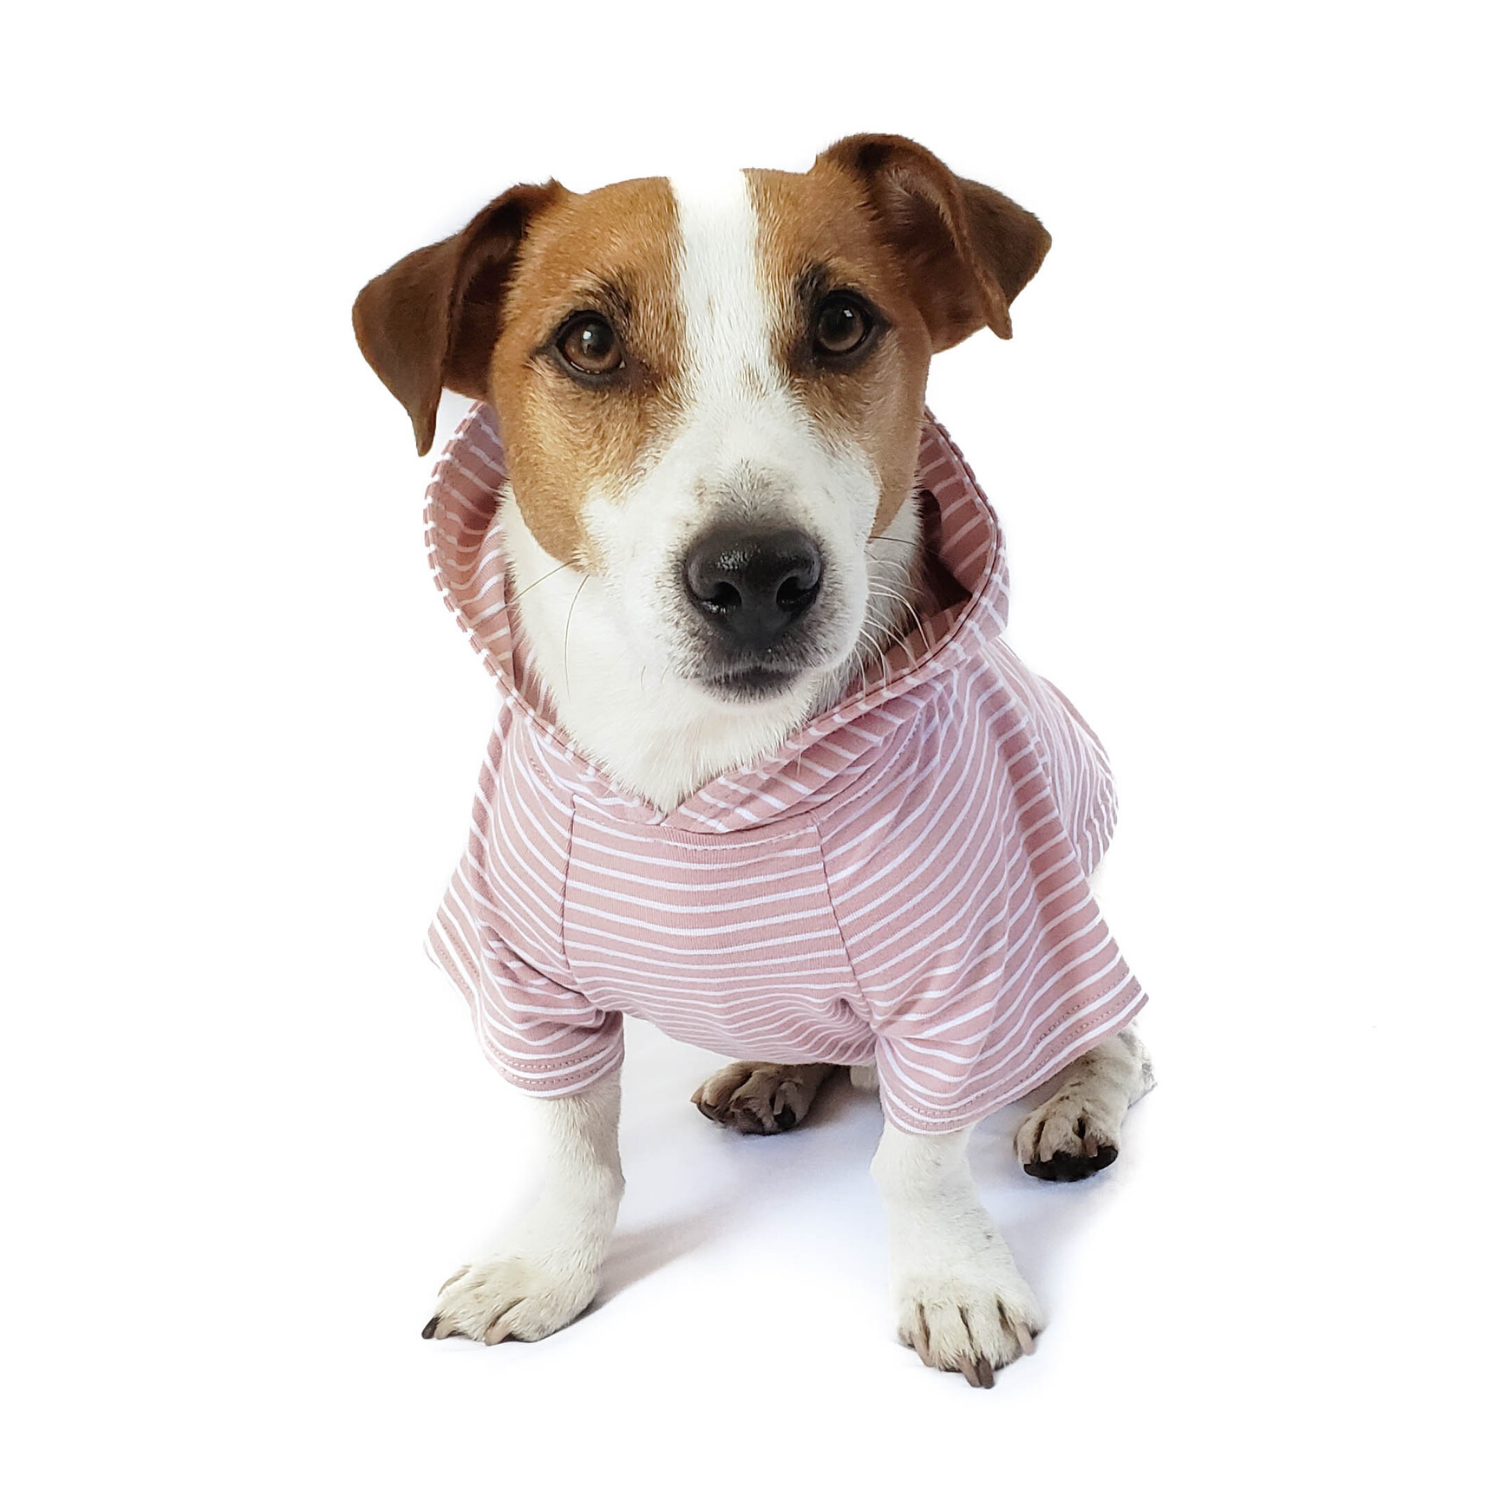 DJANGO dog hoodies are the best dog hoodies for small dogs and small dog breeds. Pair with your favorite DJANGO dog harness for the ultimate look! - djangobrand.com 